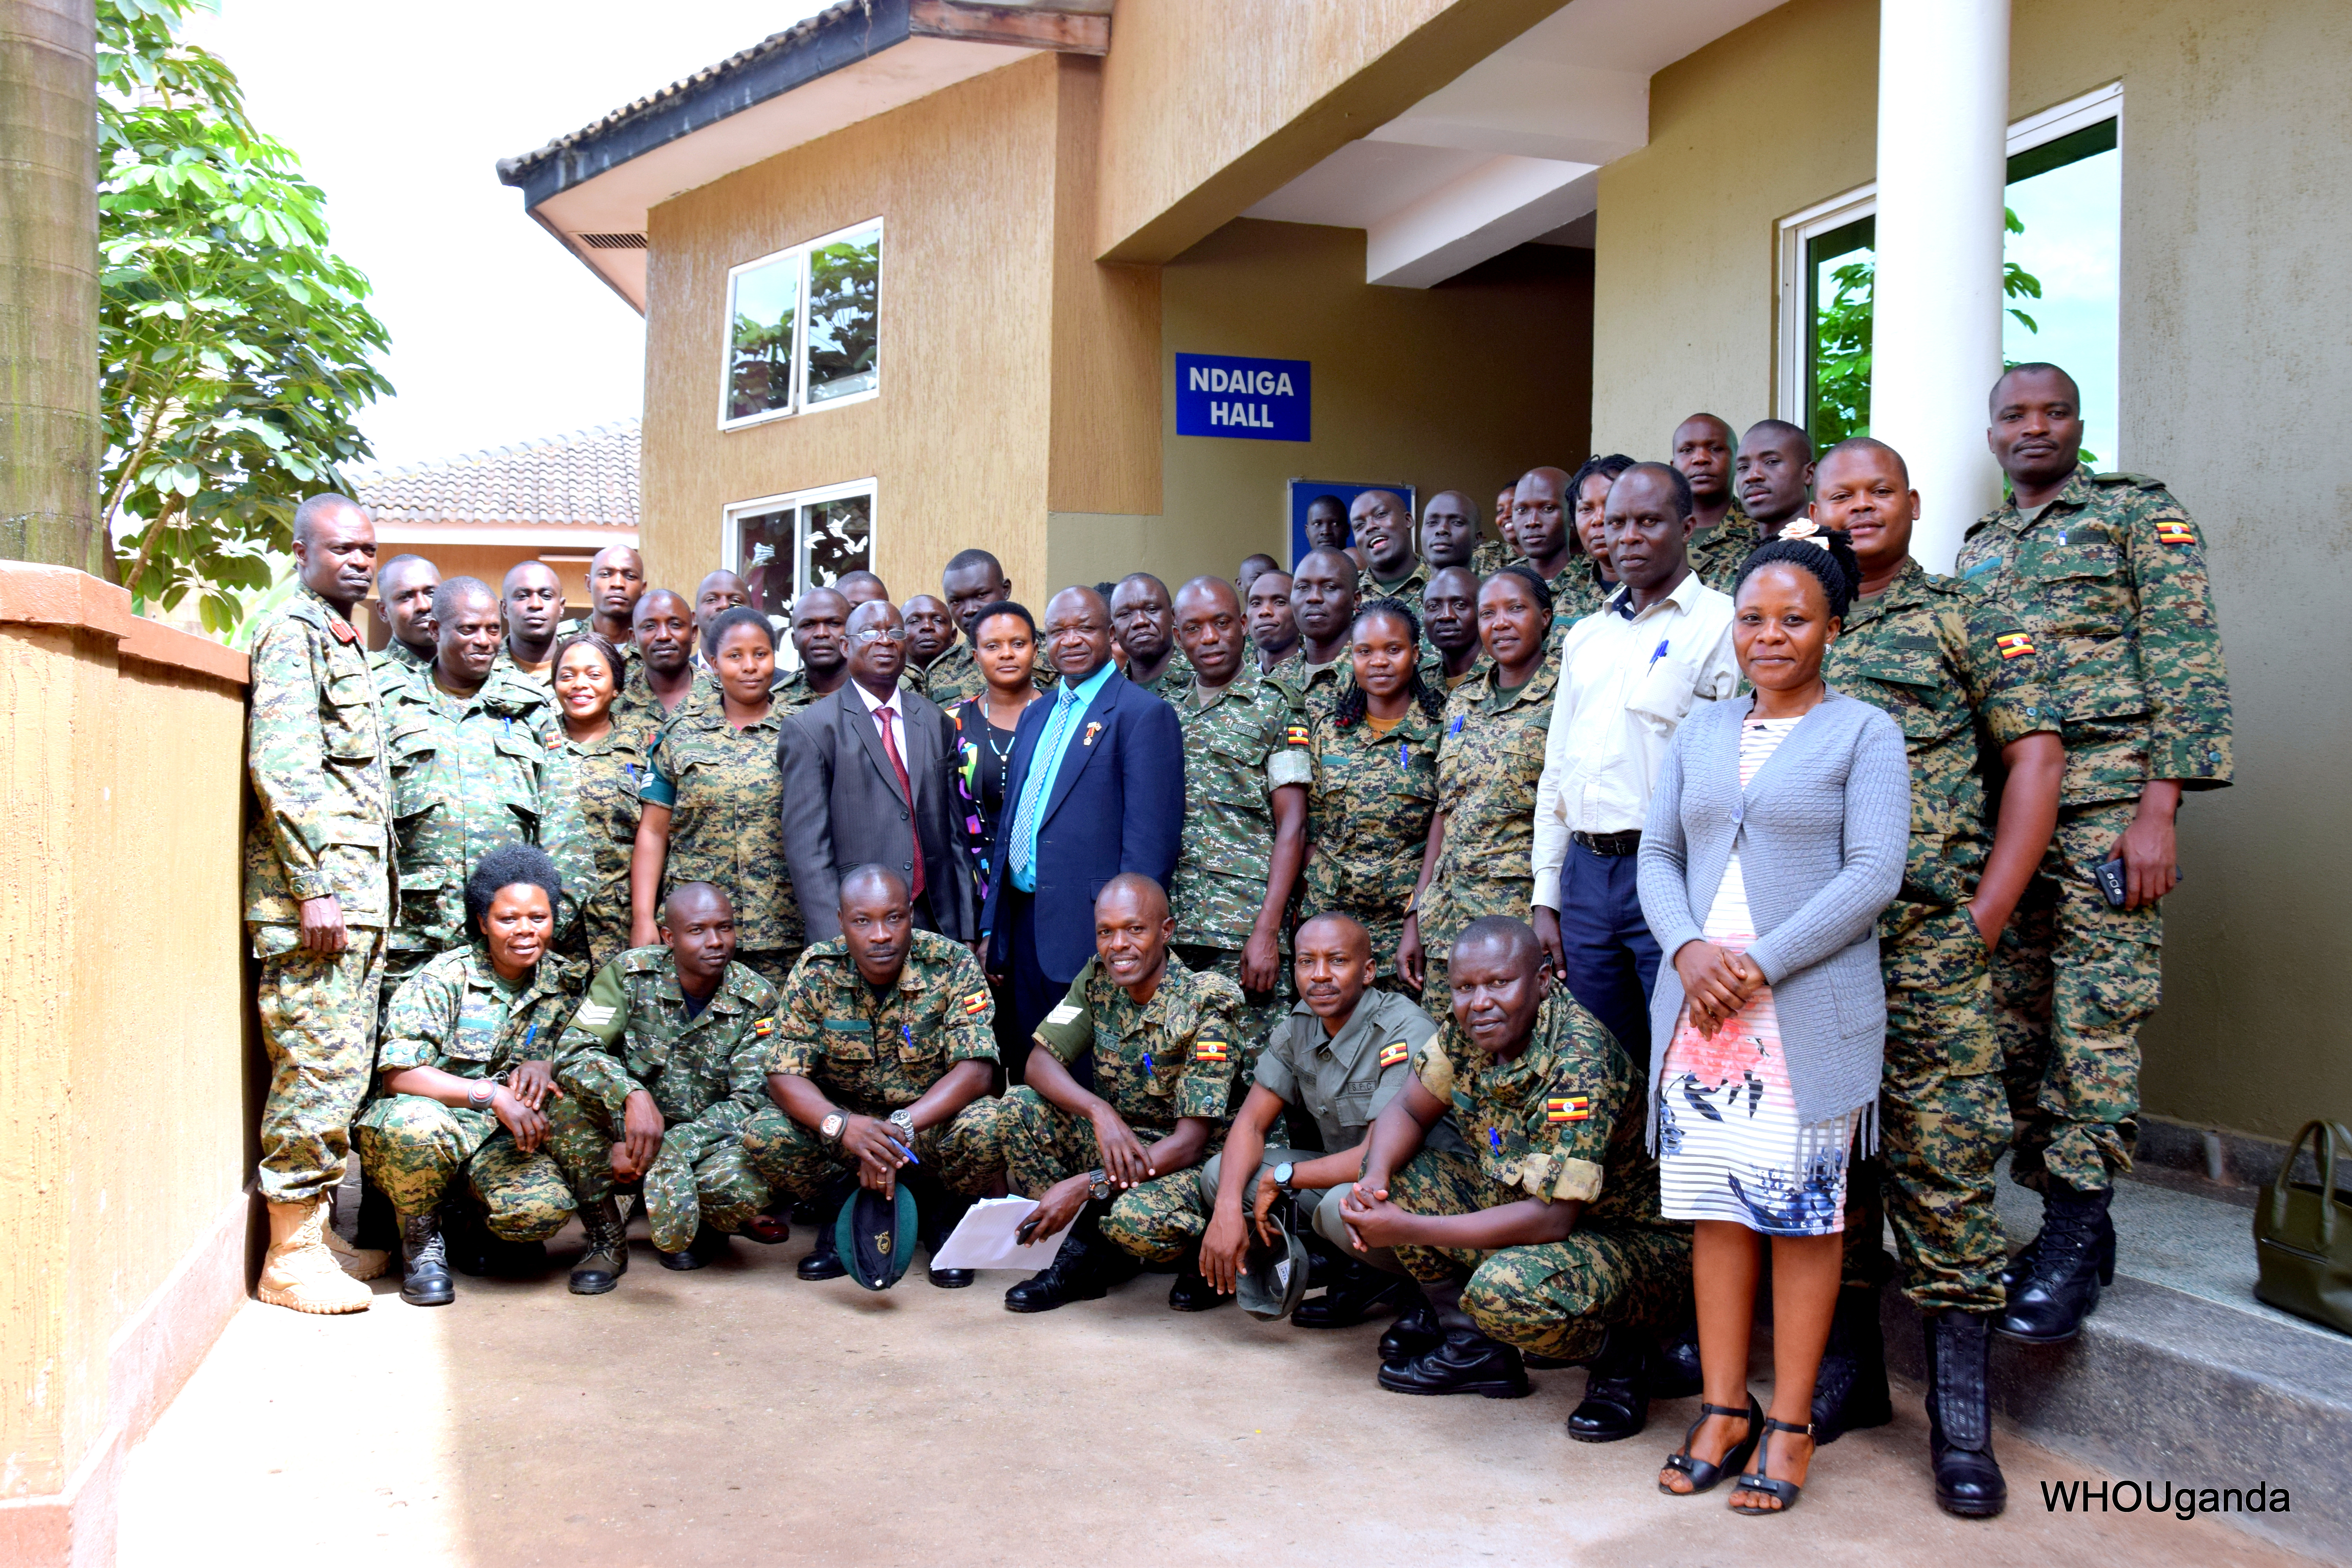 WHO and the Ministry of Health Train Members of the Armed Forces on Ebola Case Management